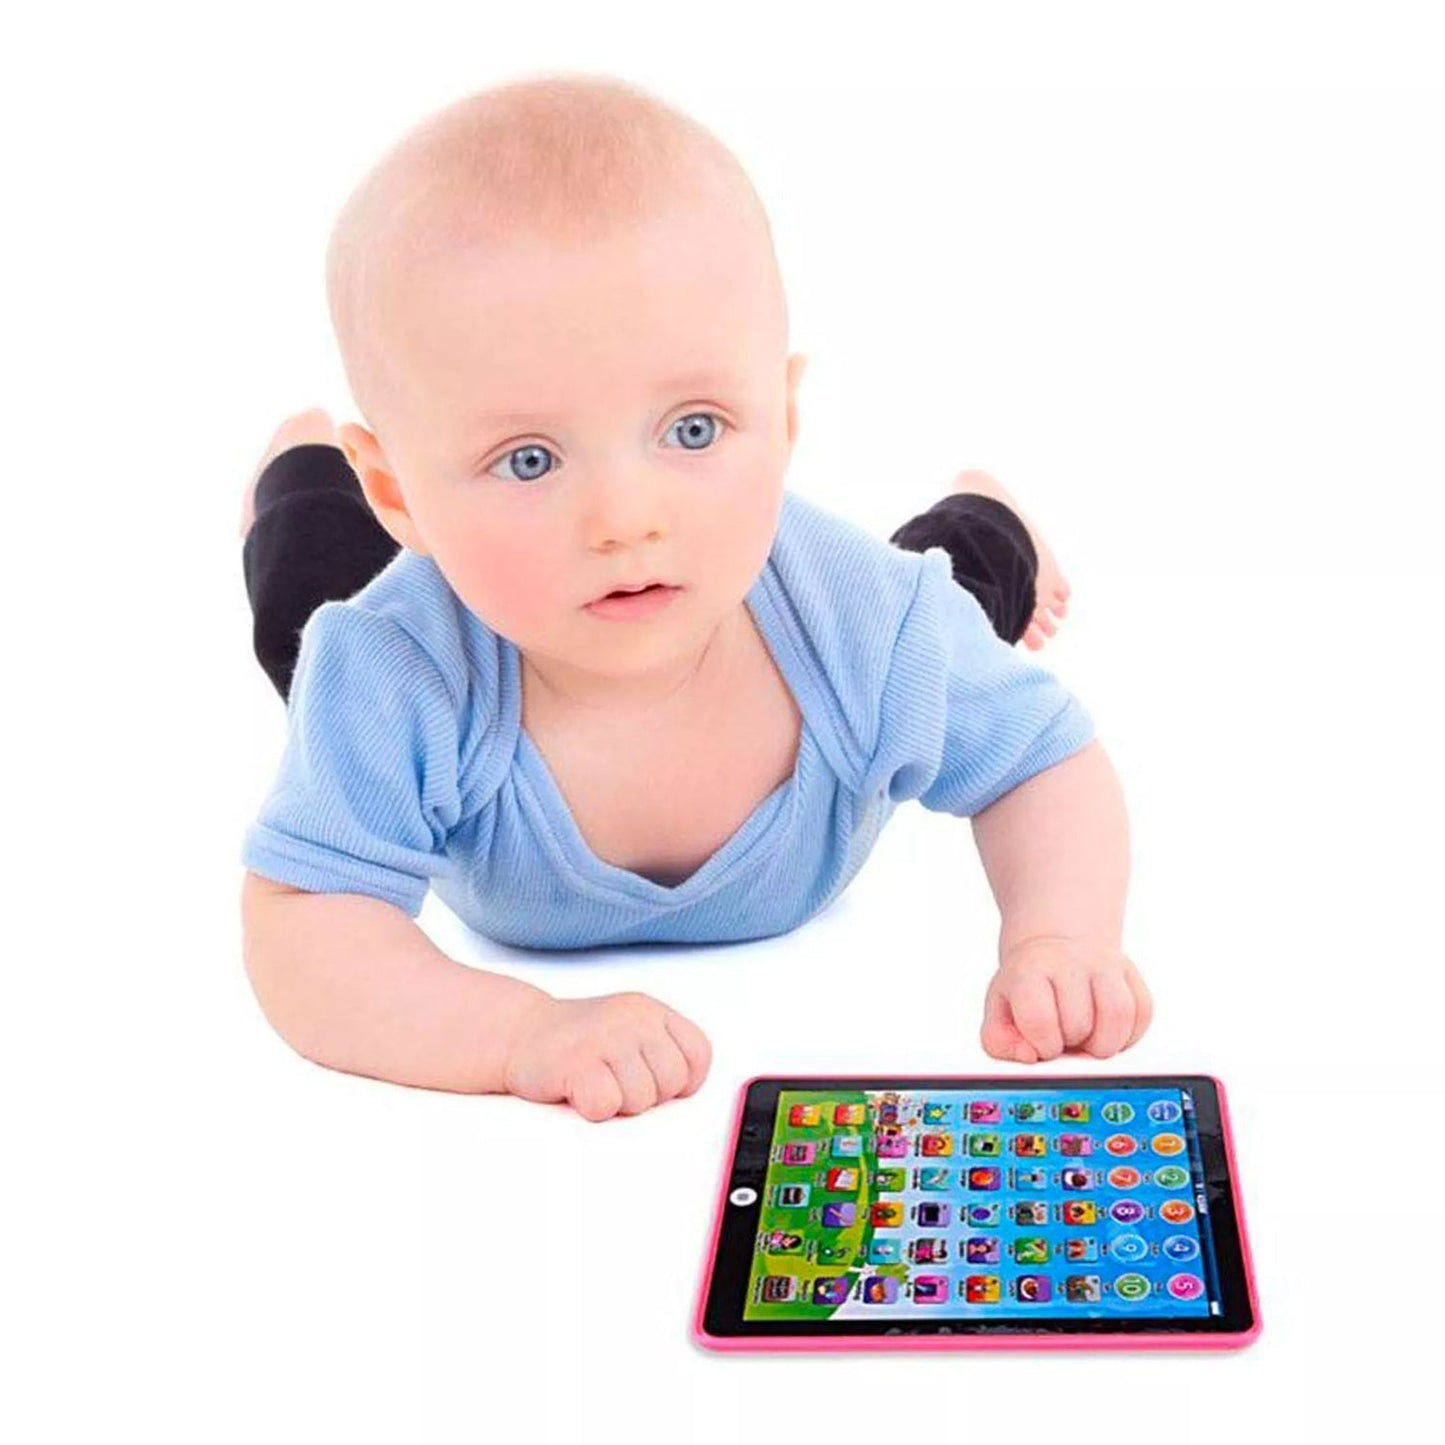 8086 Kids Learning Tablet Pad For Learning Purposes Of Kids And Children’s.